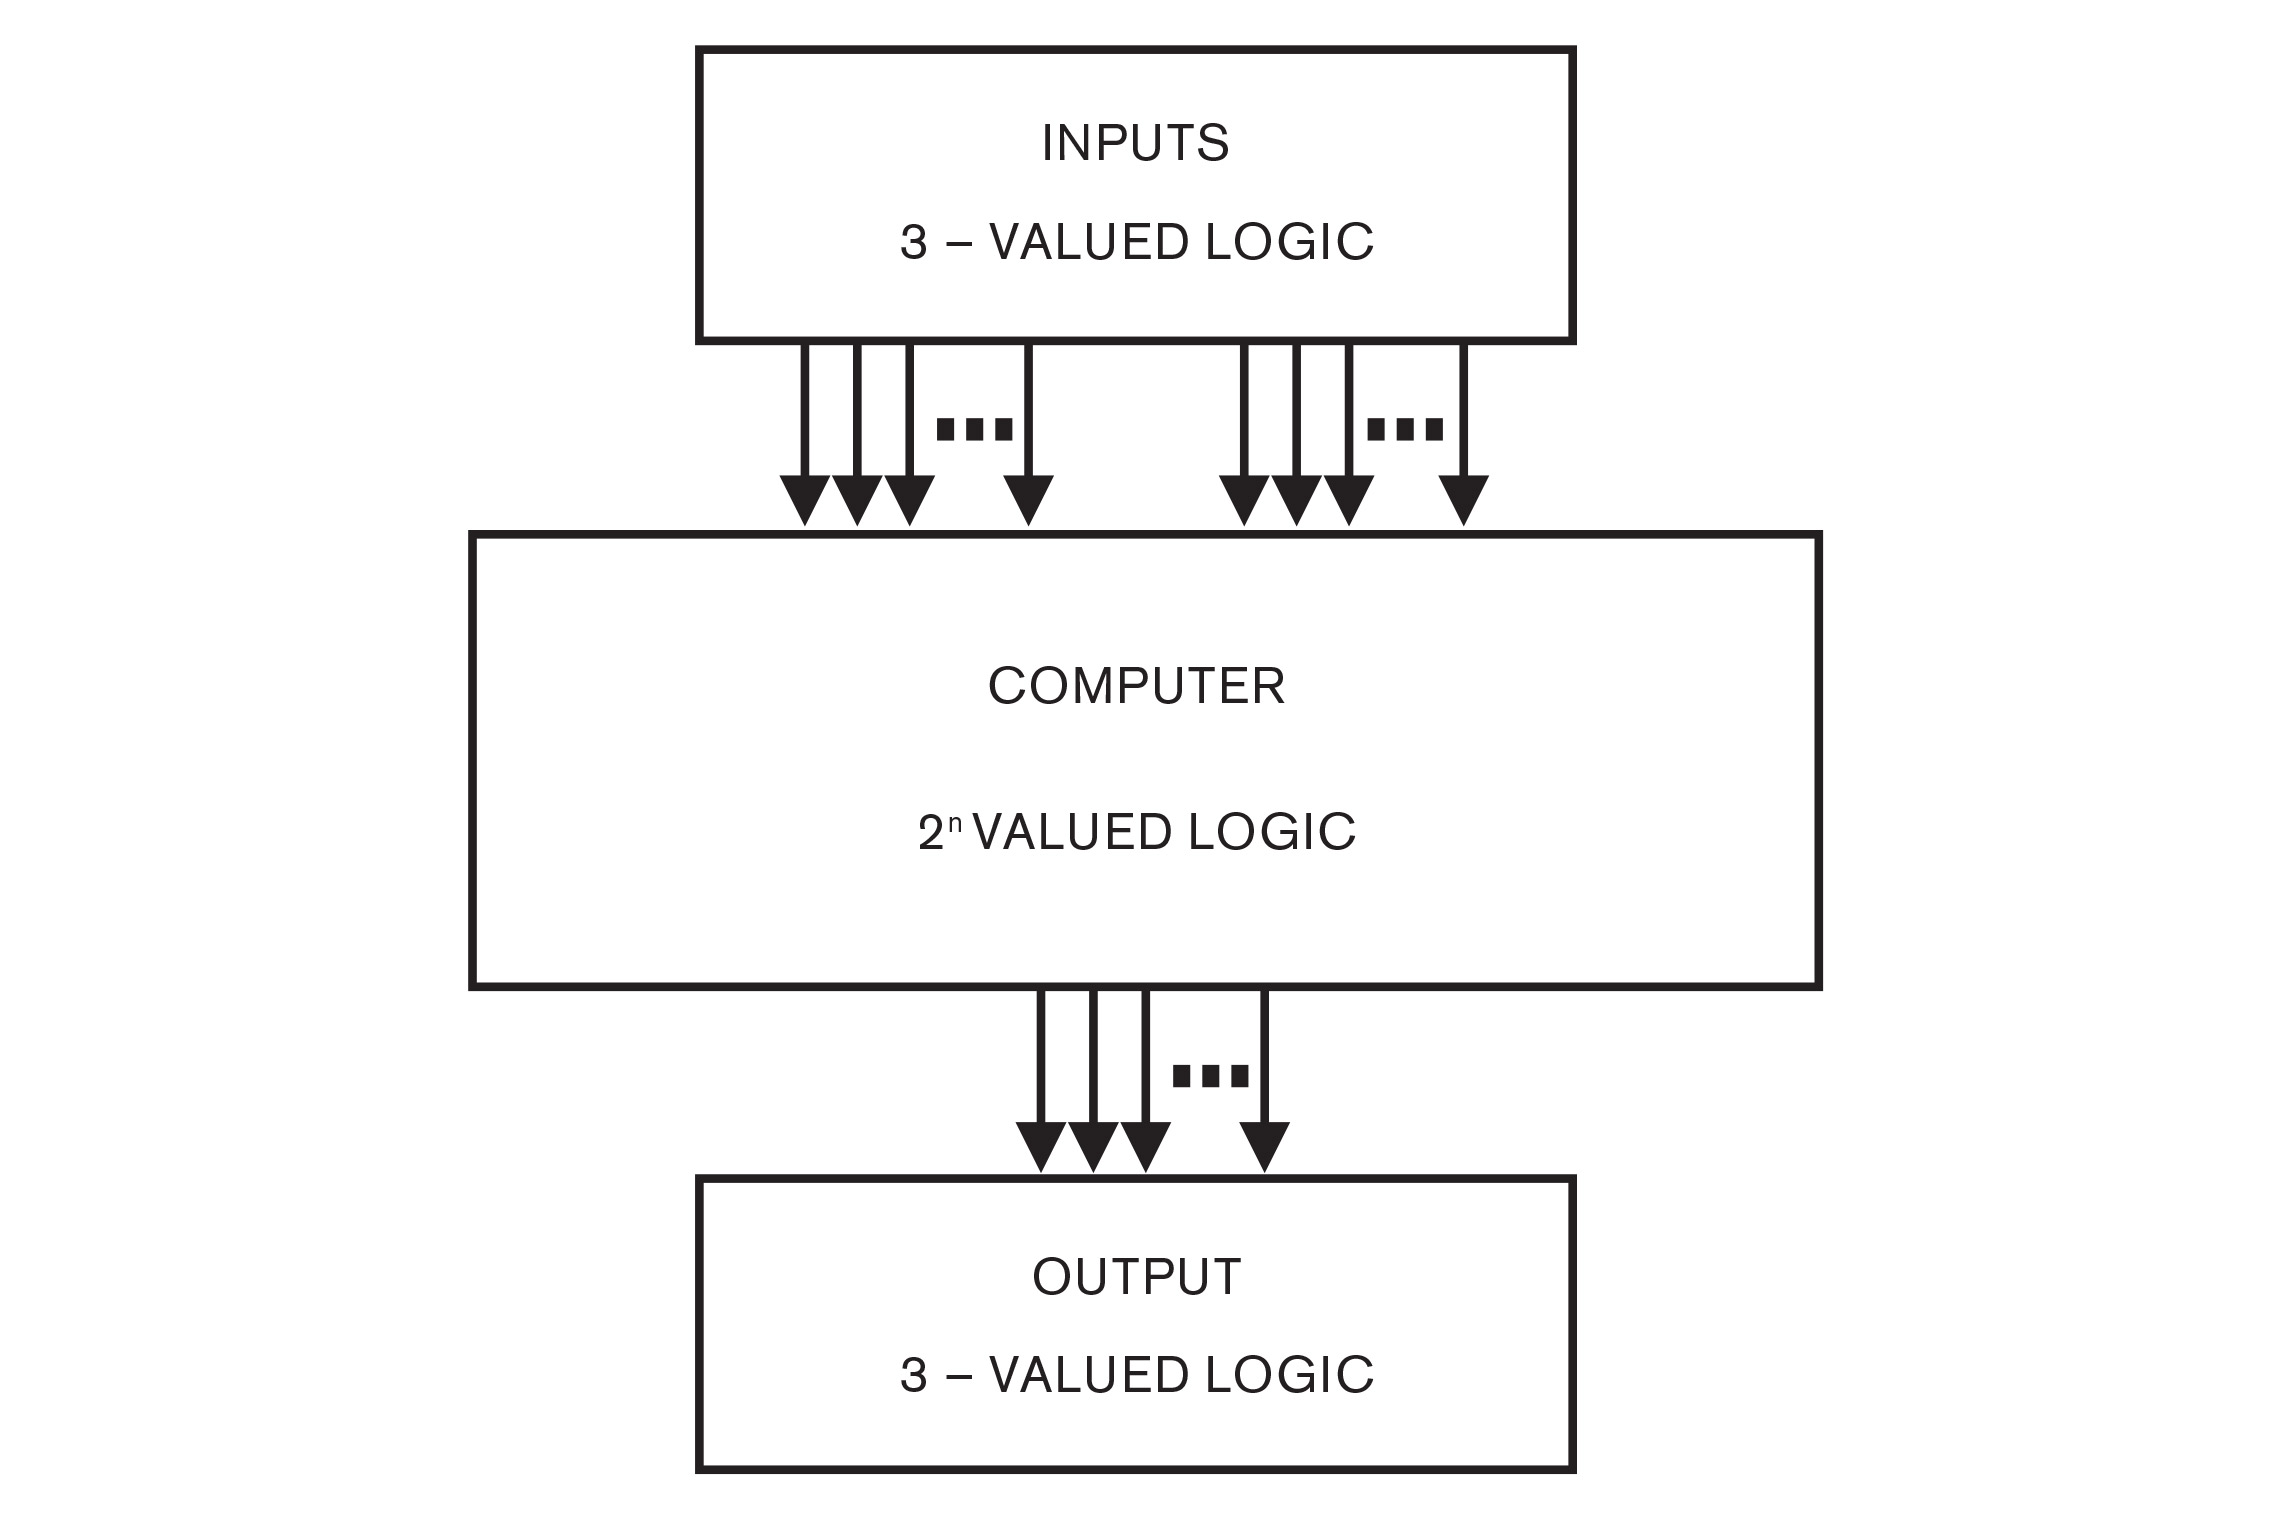 A diagram depicting Cowan’s hierarchy of logics. The diagram depicts an input and output arrangement in which input and output has three-valued logic, while the computer has two-valued logic. The diagram seems to suggest that while computer hardware is two-valued, composed of on-off switches, the input itself has more dimensions which must be compressed in order to be calculated, and the output in turn results in more than binary results. The diagram points to the possibility that this kind of digital communicative automaton realizes only a part of a many-valued input and output world, not simplifying or compressing but contending as a separate set of binary principles with the many values it cannot contain. At the same time, the intermediate stages are represented by arrows, with adjacent dots that suggest a way to “weight” the inputs and outputs to account for this, overcoming what Cowan saw as a flaw in von Neumann’s design. 